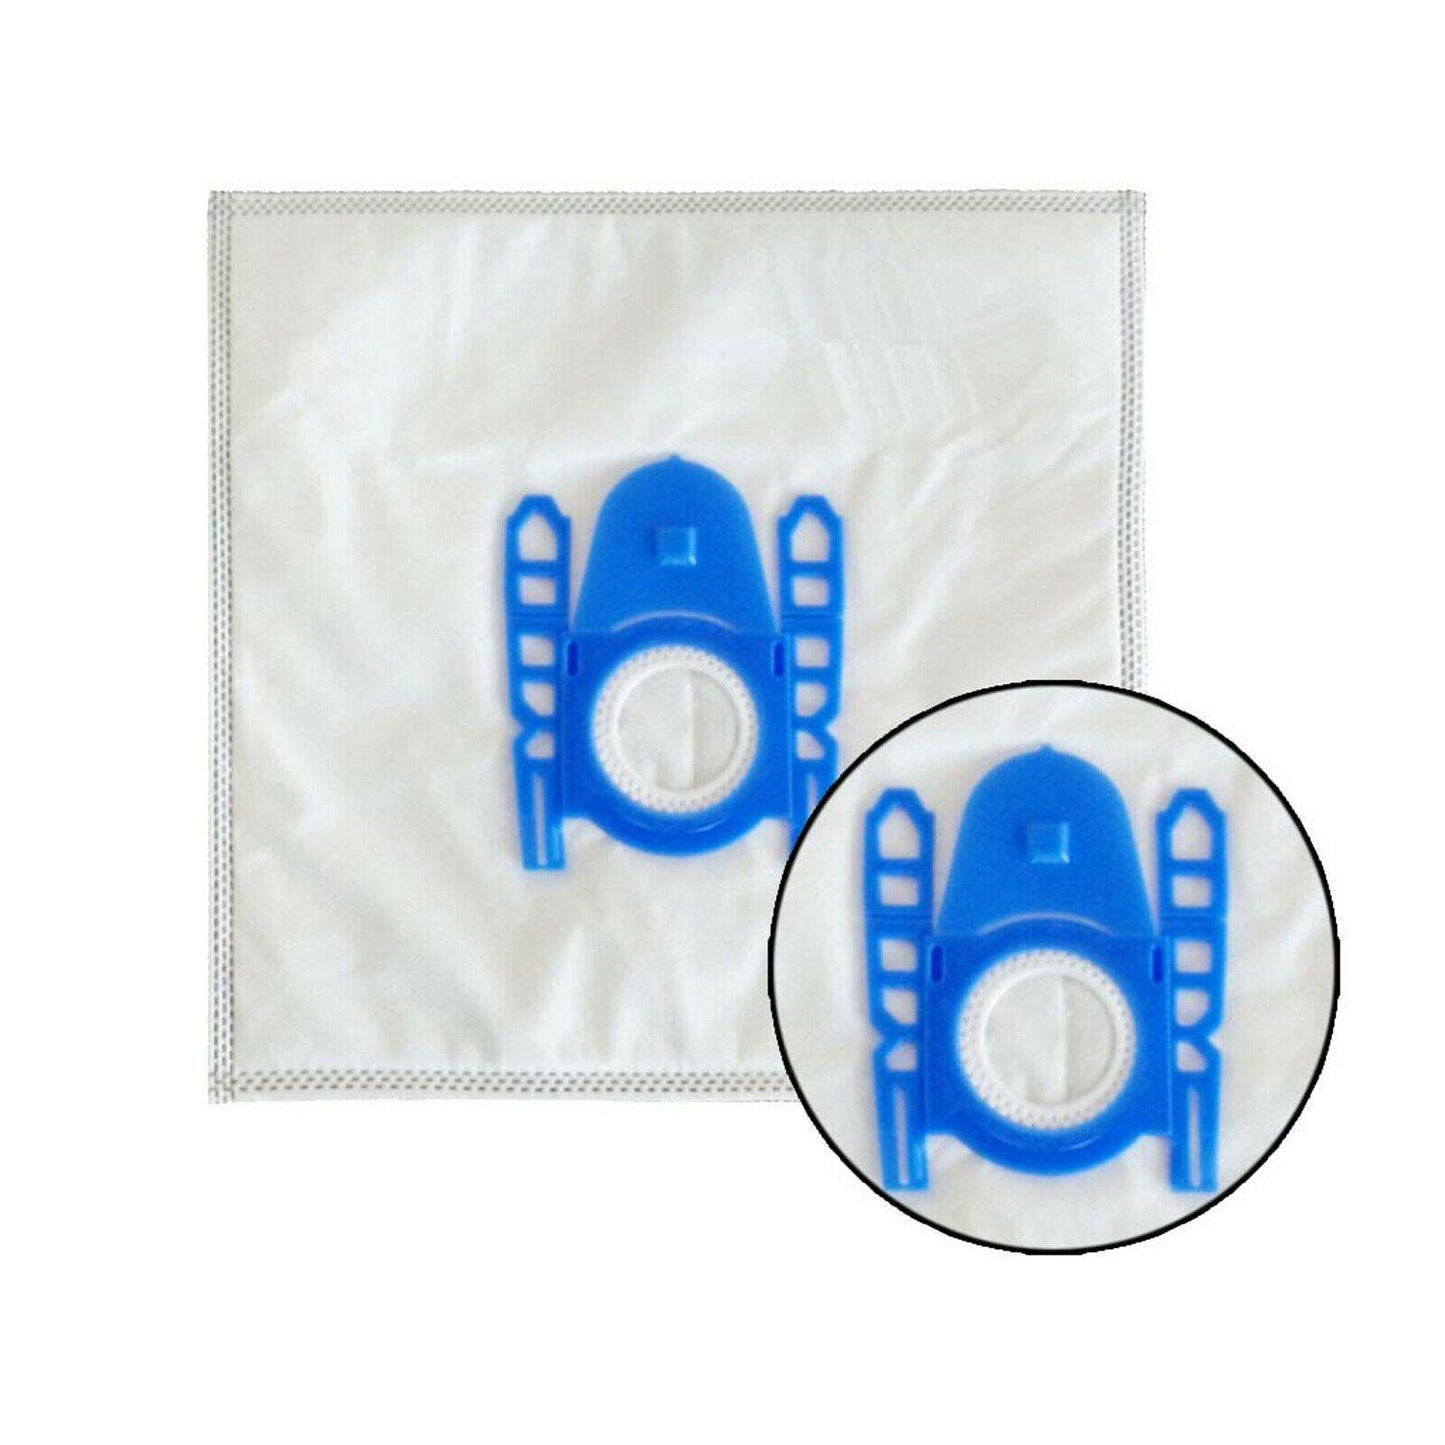 6X Vacuum Cleaner Bags & 2 Filters For Bosch Type G/G All BBZ41FGALL 17000940 Sparesbarn